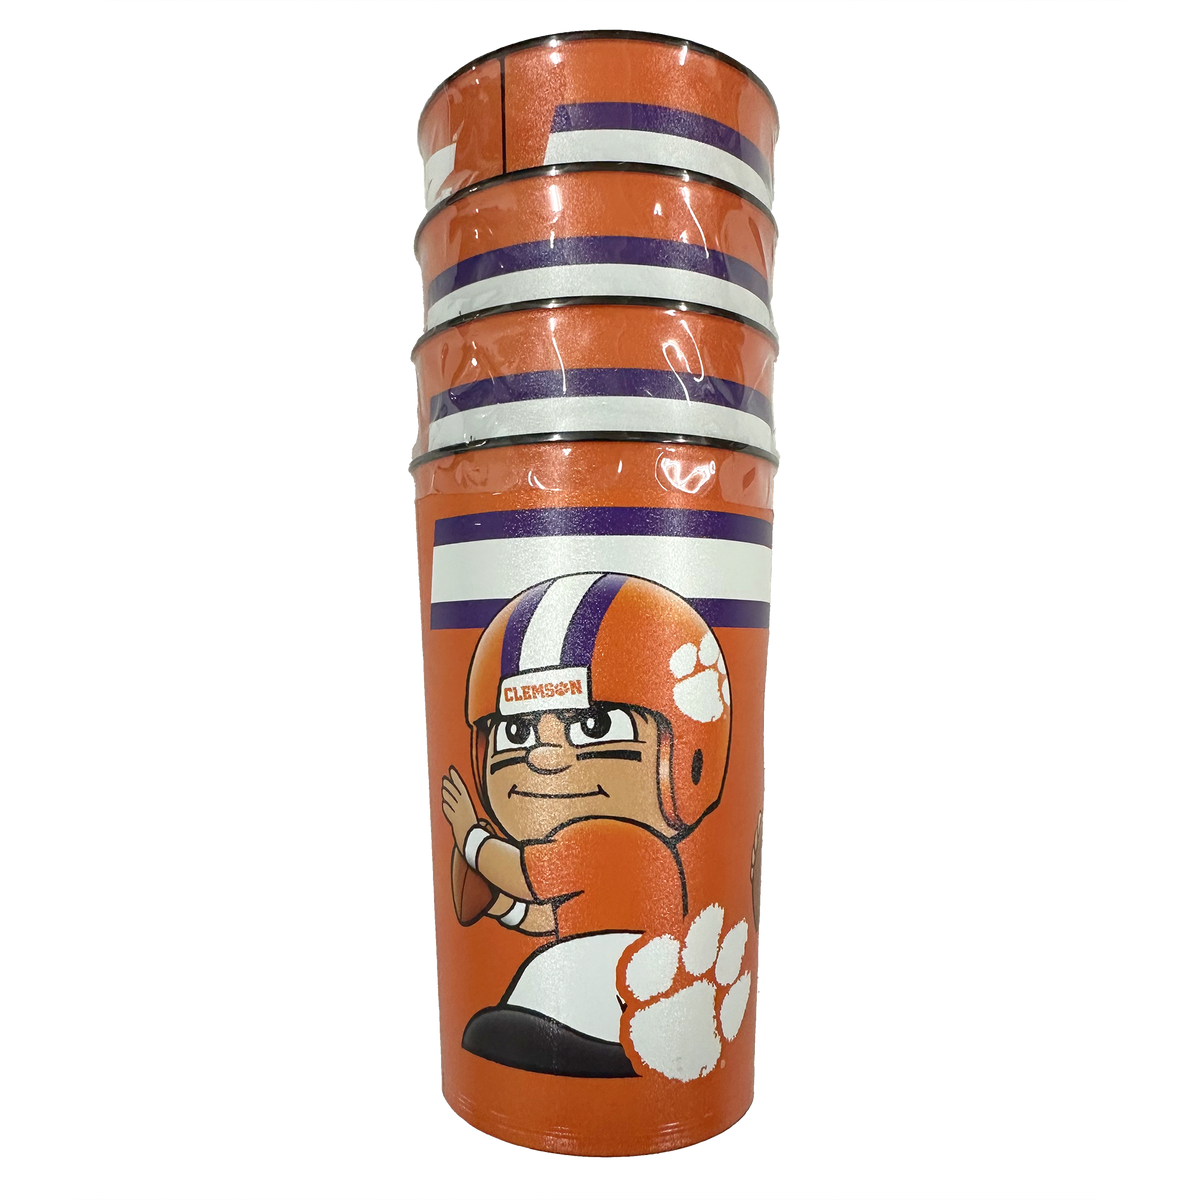 Clemson Party Cup 4 Pack